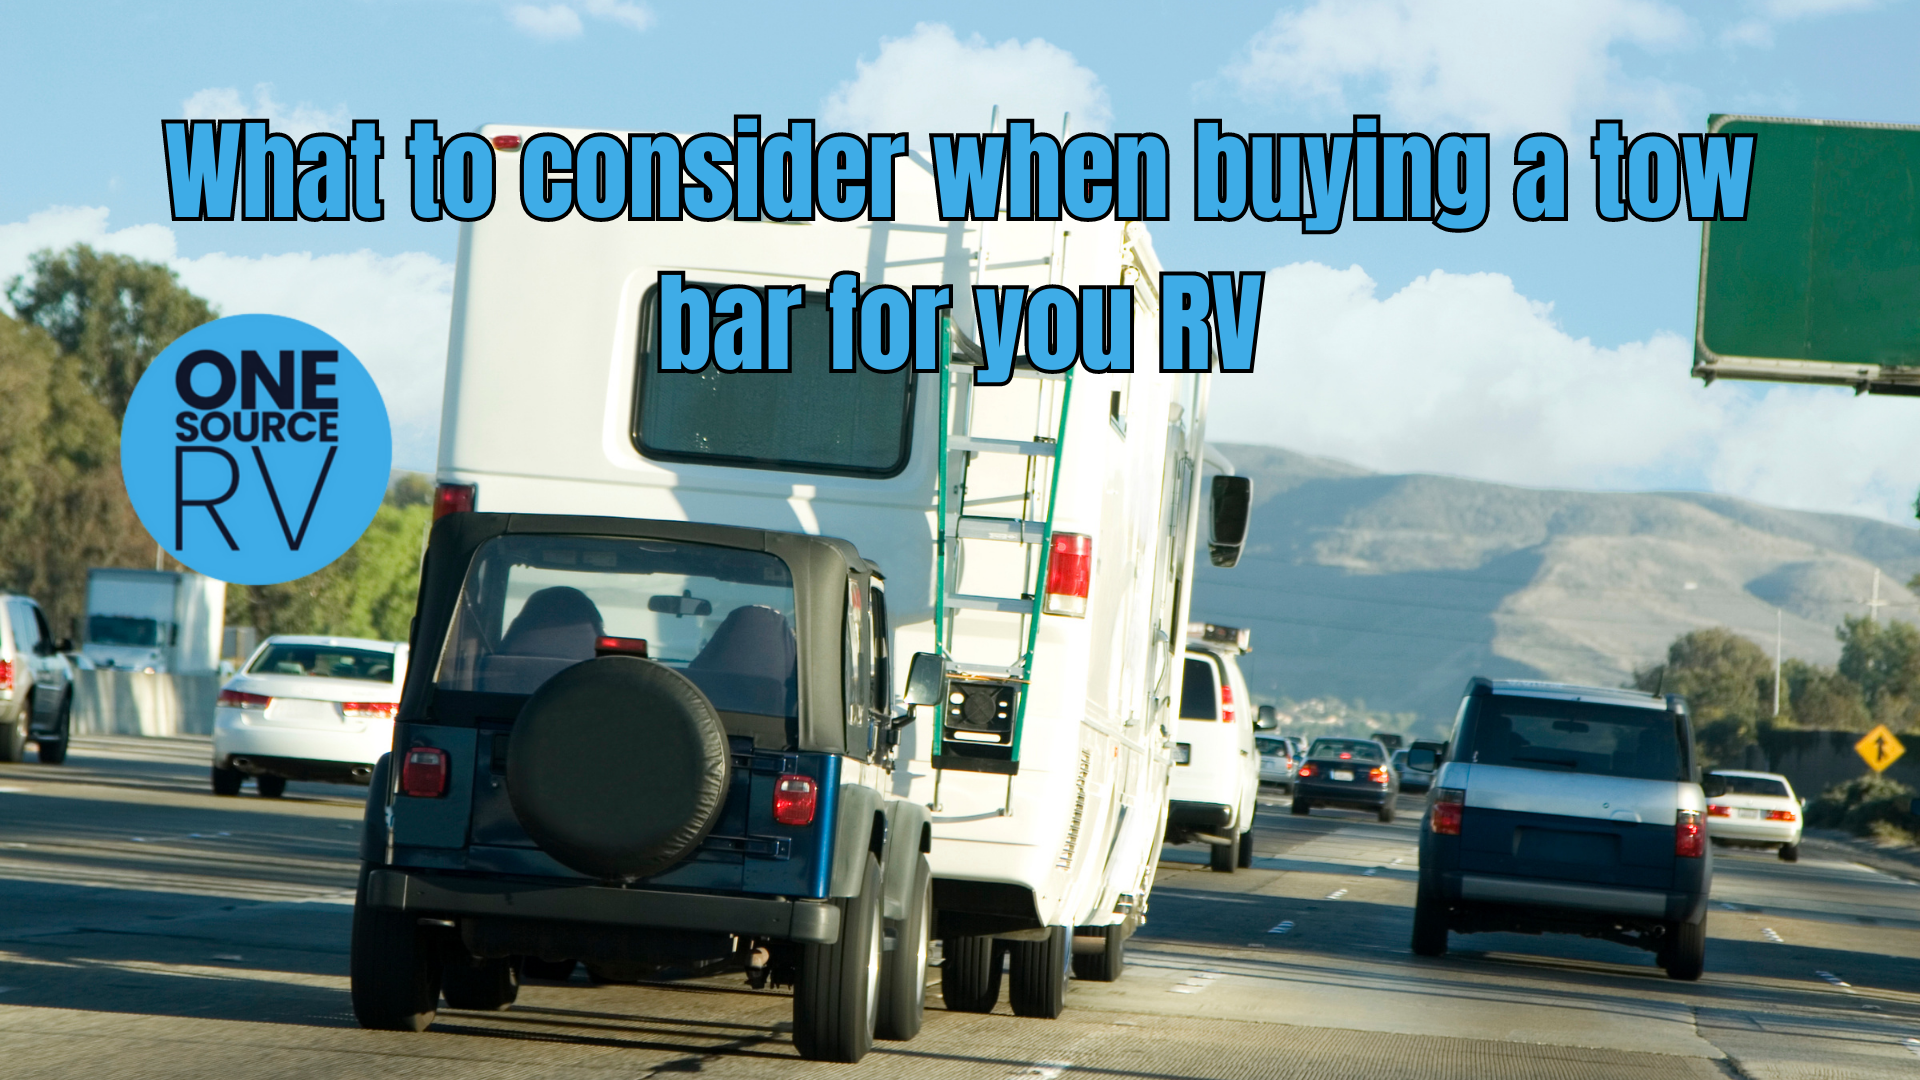 What to consider when buying a tow bar for you RV